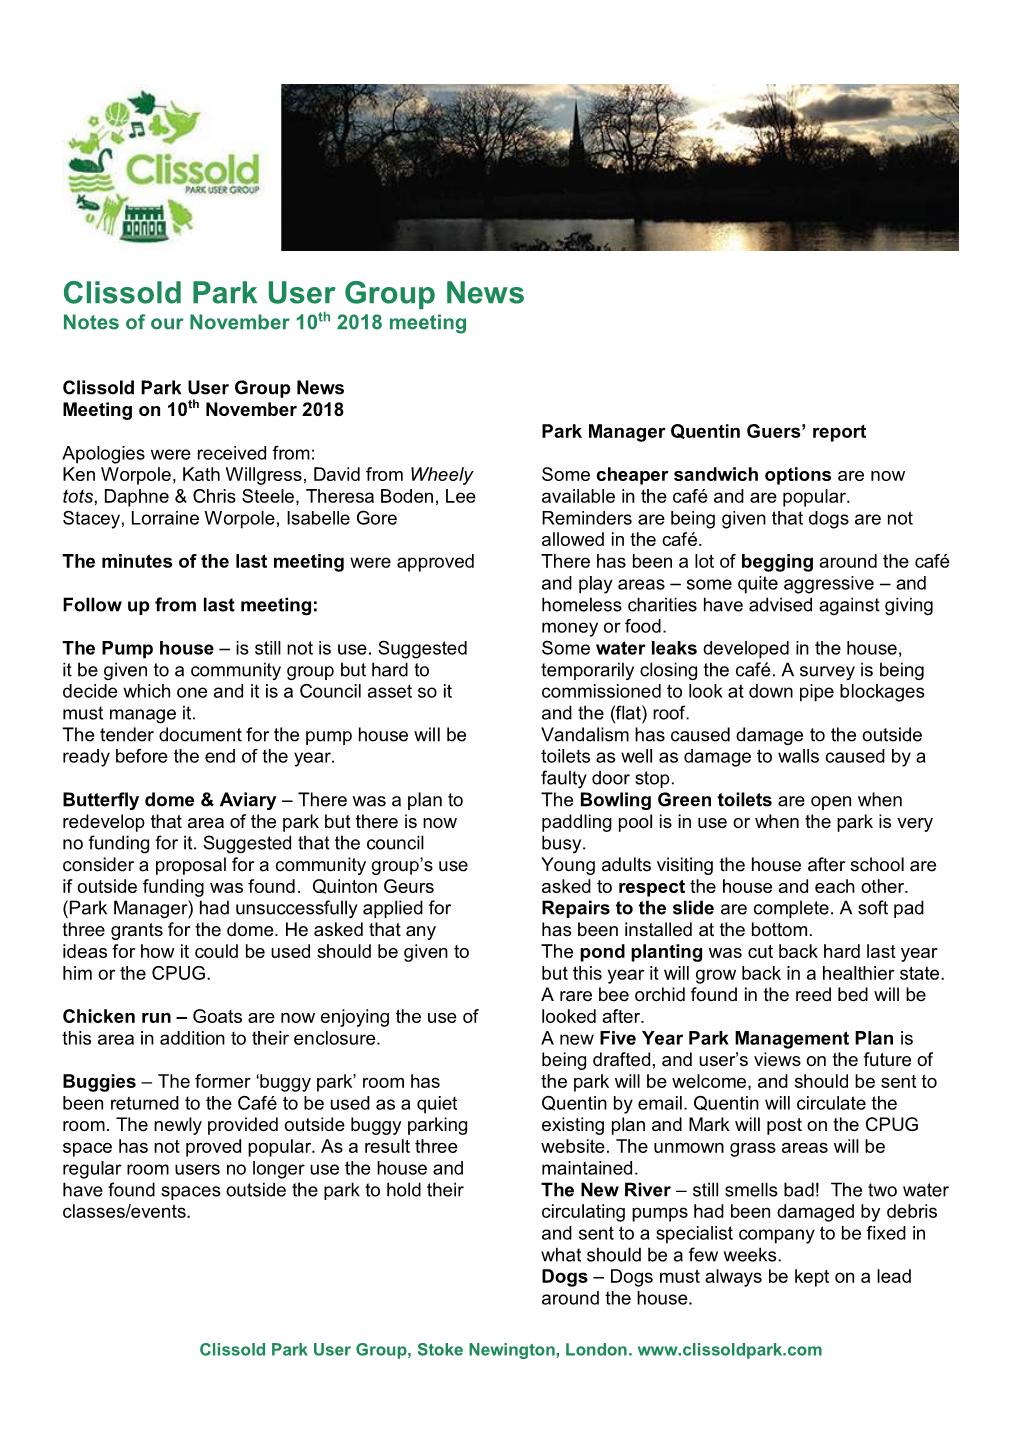 Clissold Park User Group News Notes of Our November 10Th 2018 Meeting